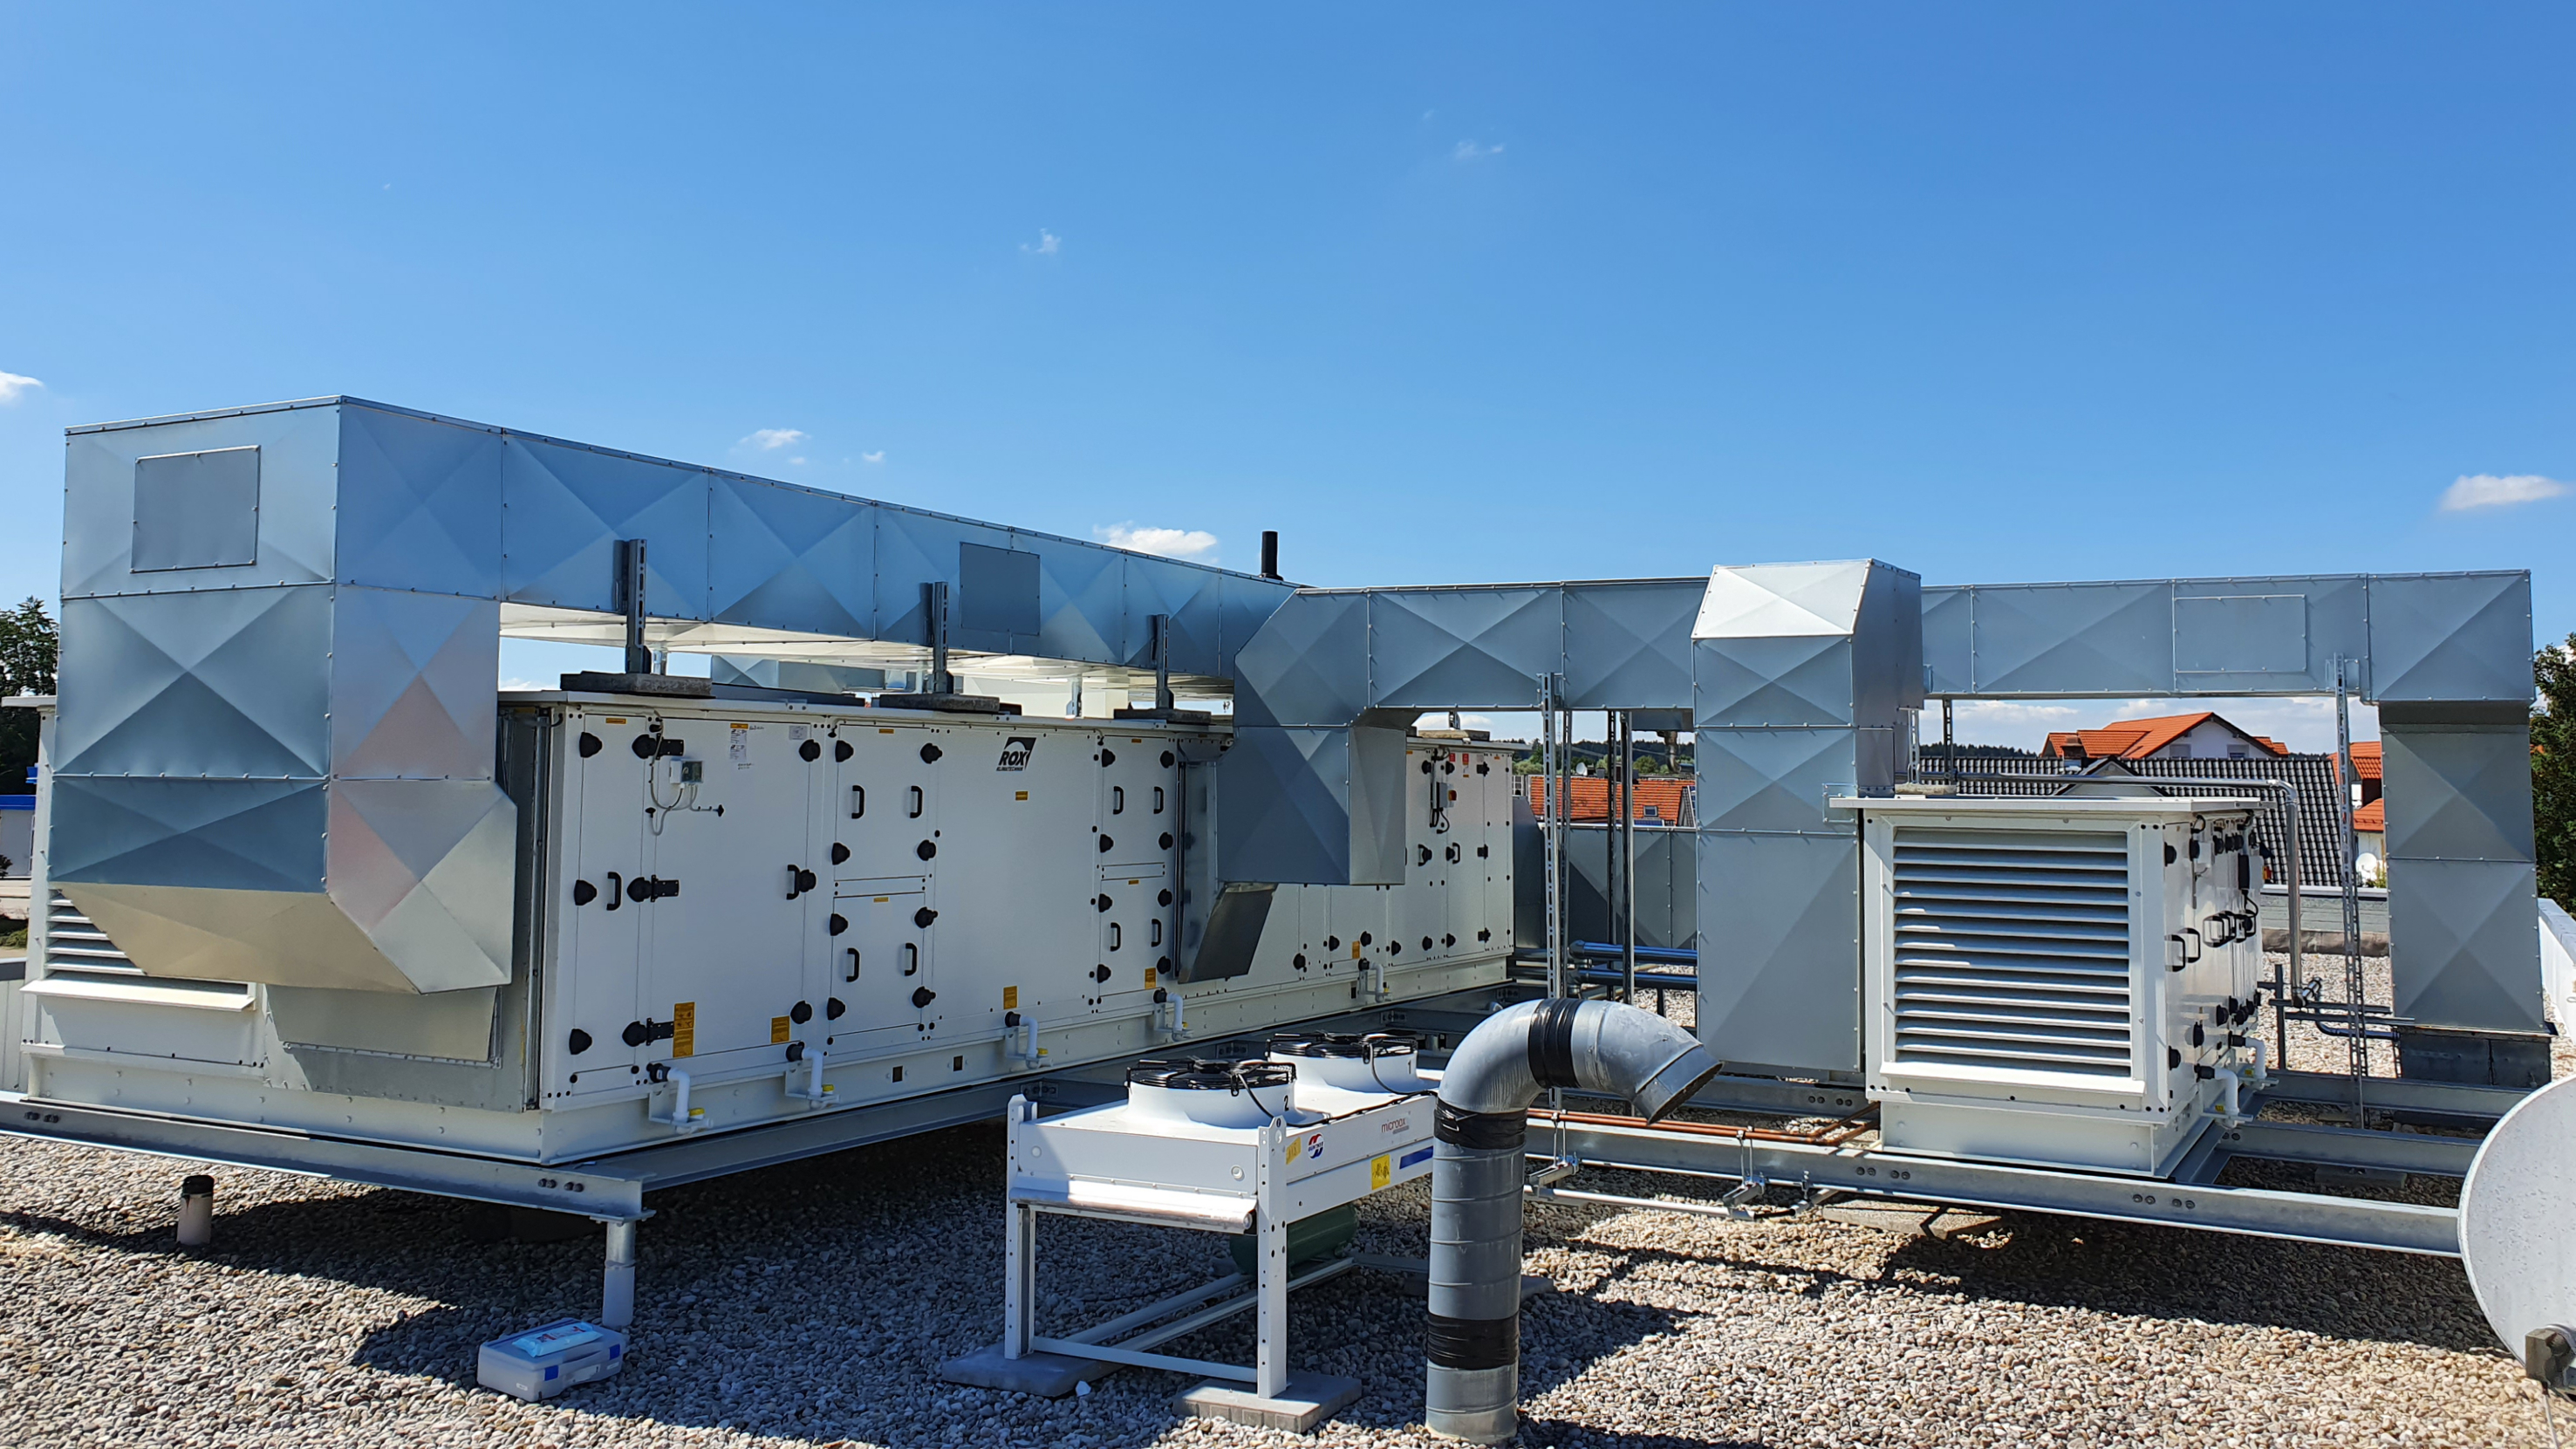 Rox designs and manufactures individual air conditioning systems to meet specific requirements